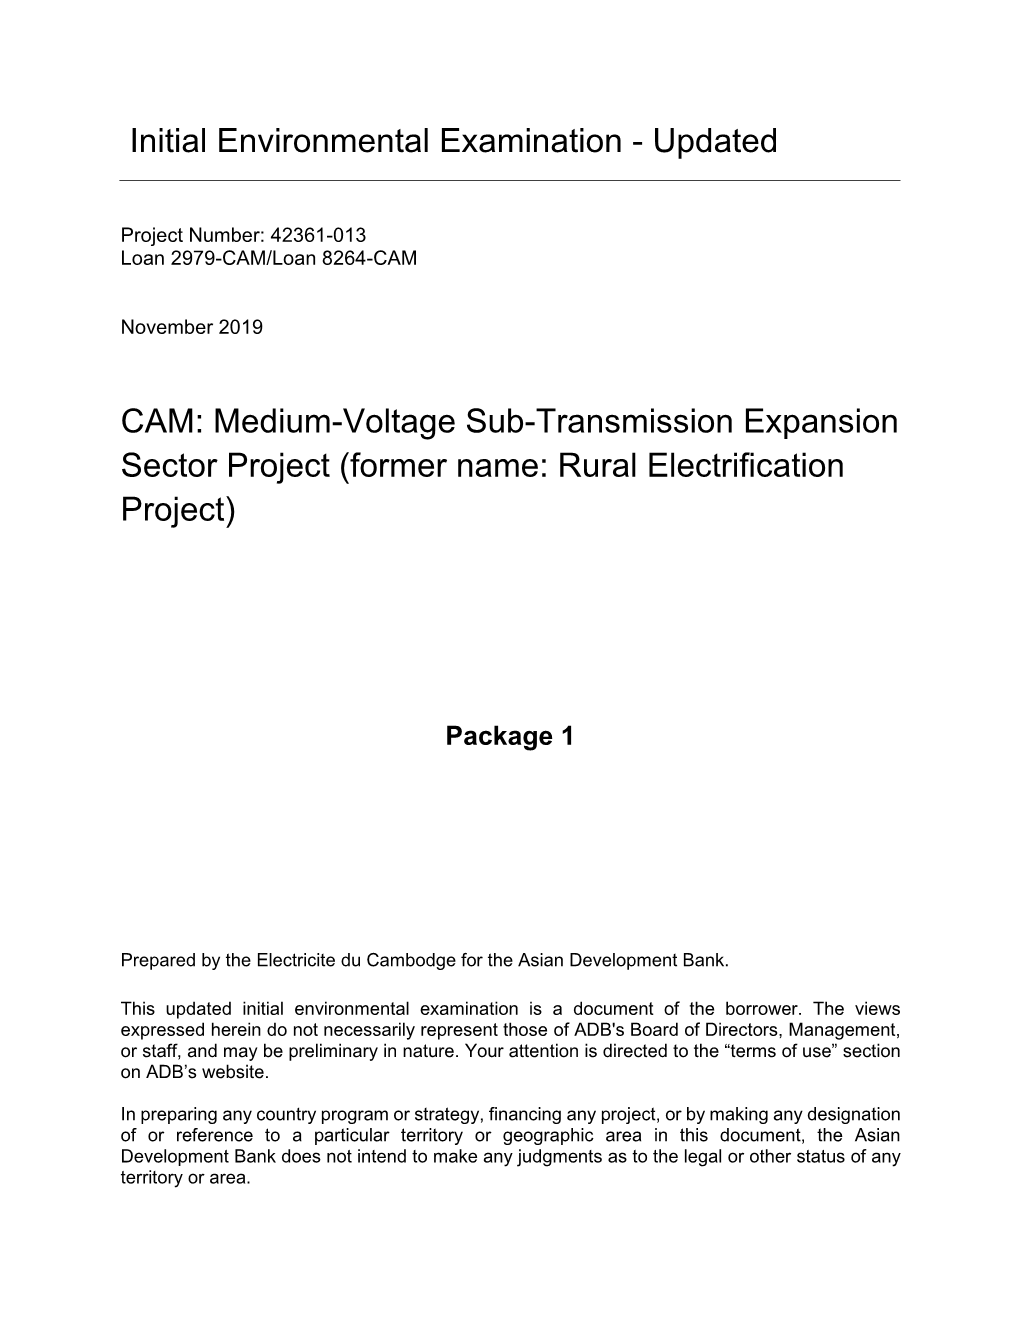 Medium-Voltage Sub-Transmission Expansion Sector Project: Package